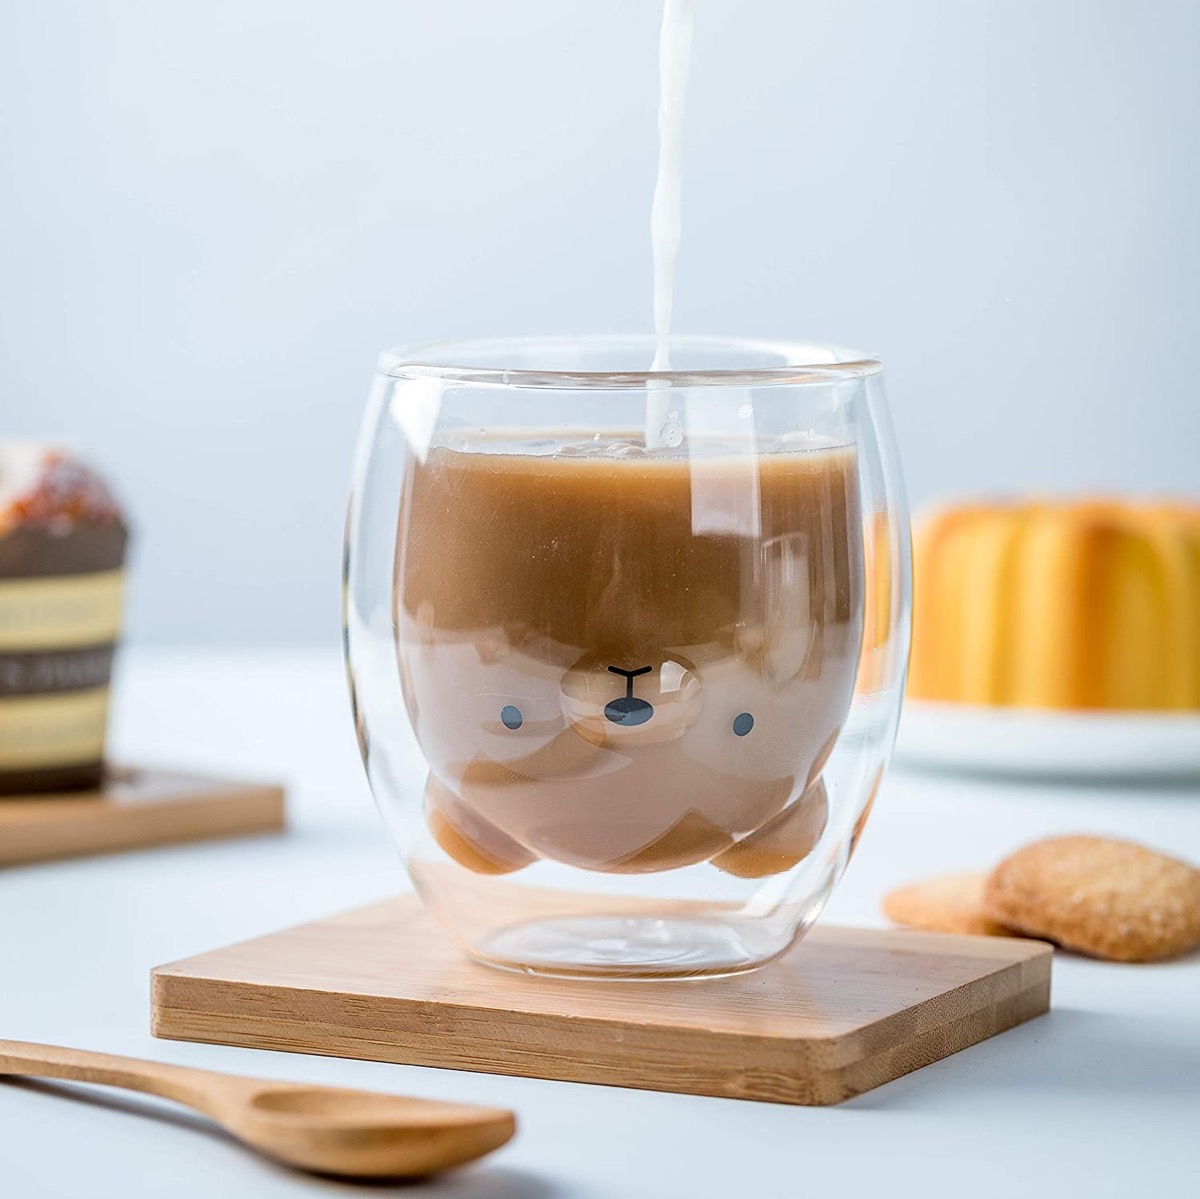 http://www.home-designing.com/product-of-the-week-a-cute-double-walled-bear-glass